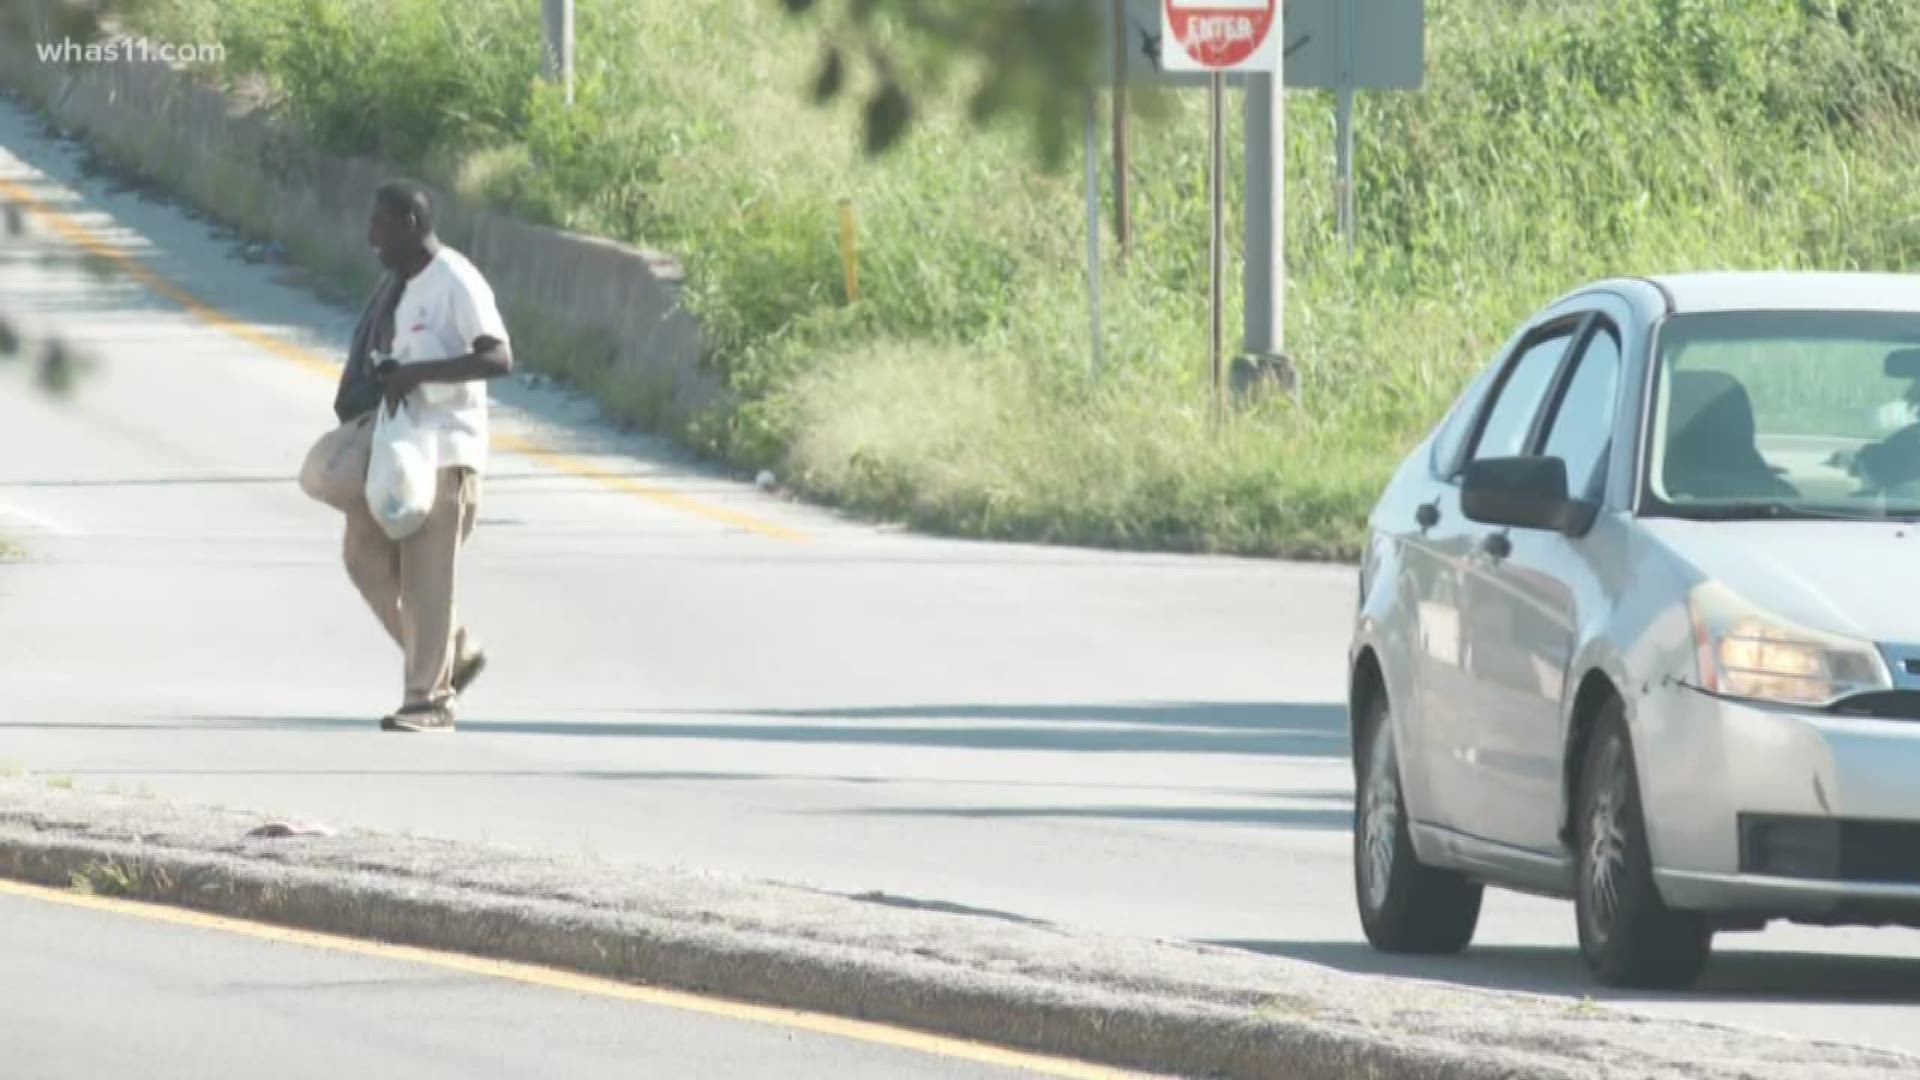 A new proposal in Louisville aims to crackdown on jaywalkers, including panhandlers.